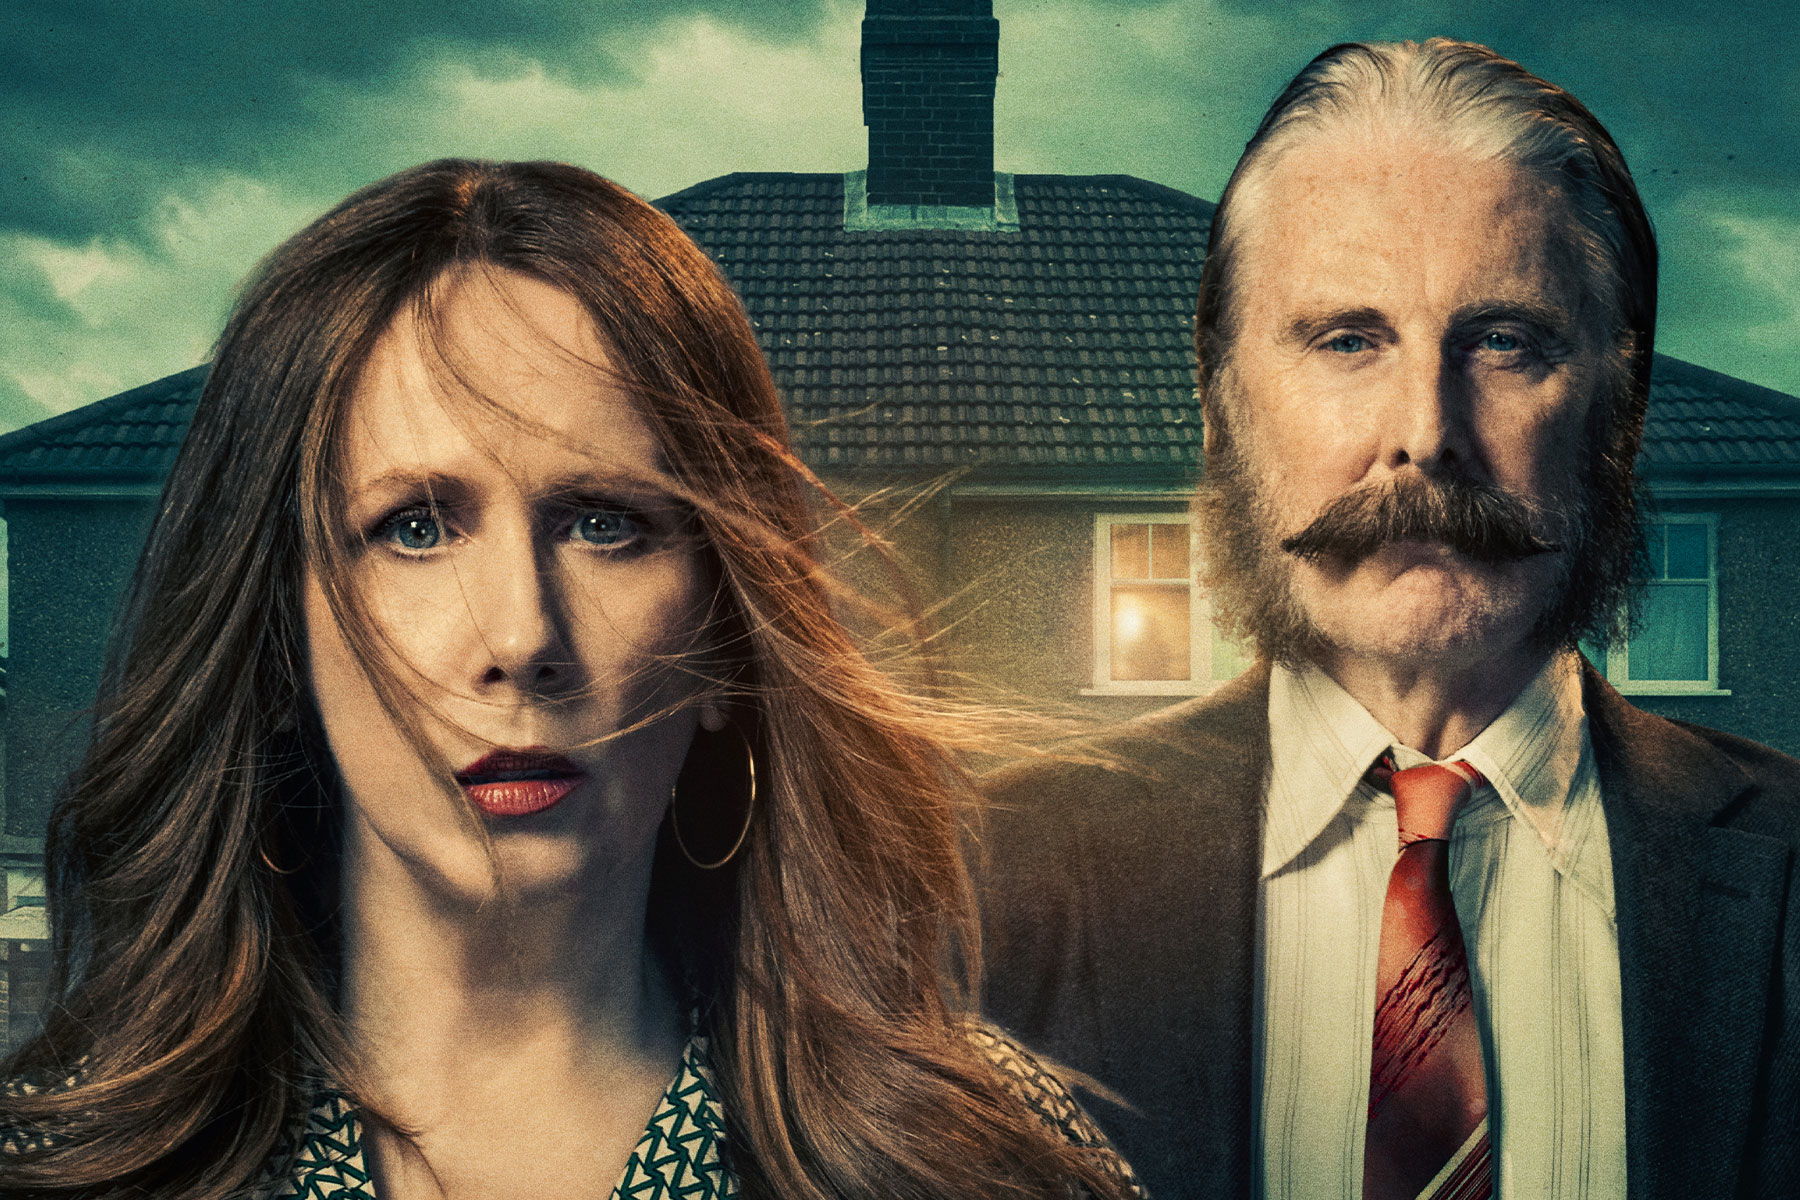 A promotional image for The Enfield Haunting, featuring Catherine Tate and David Threlfall